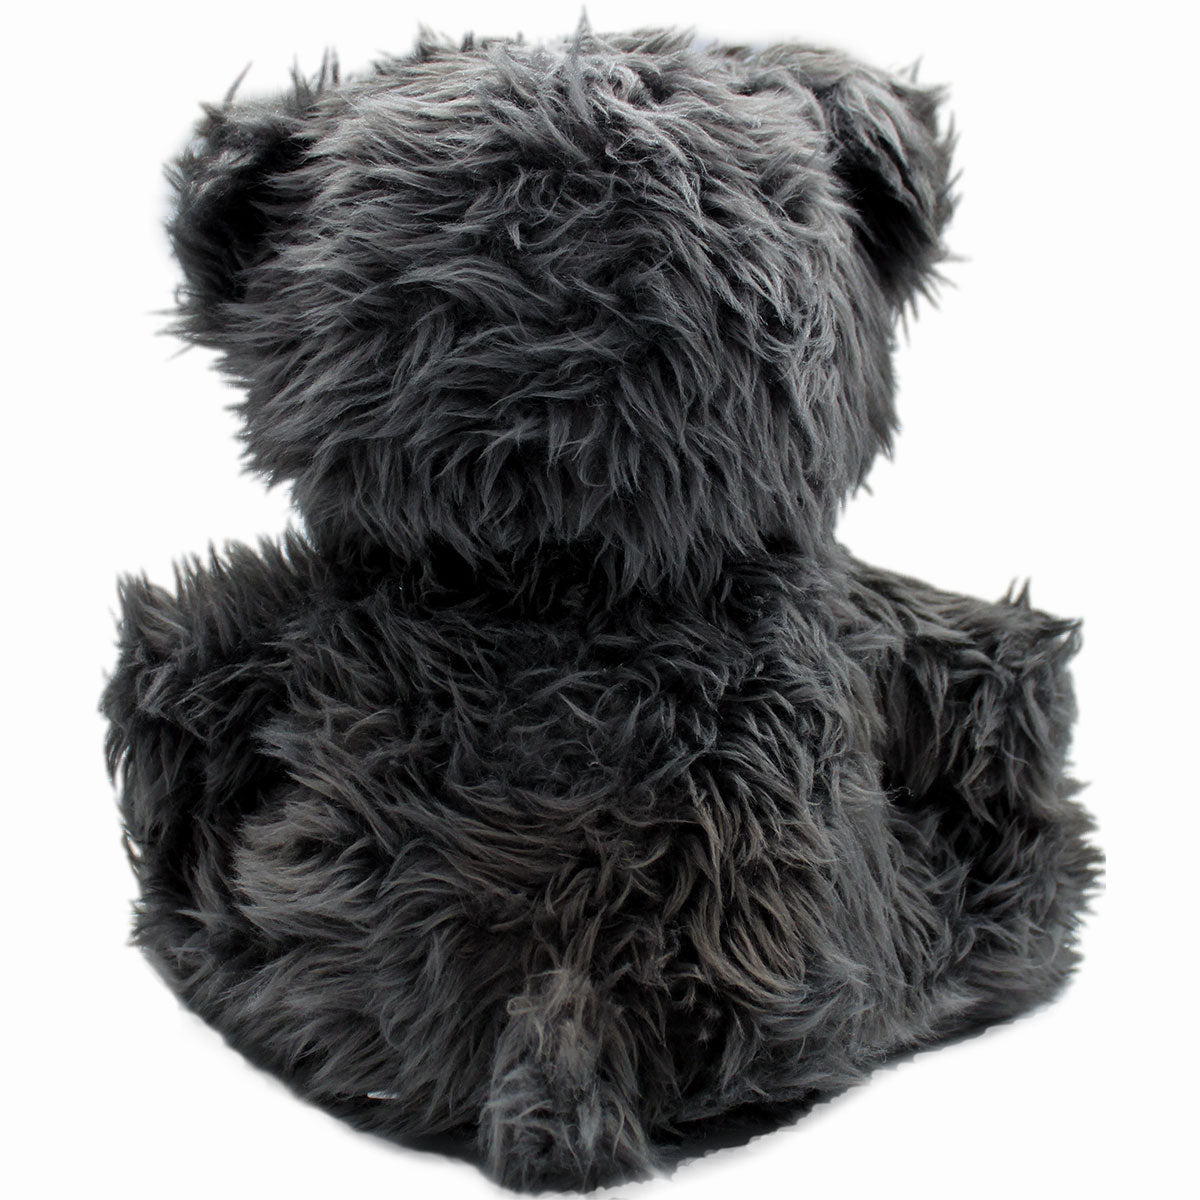 DAY OF THE TED - Collectable Soft Plush Toy